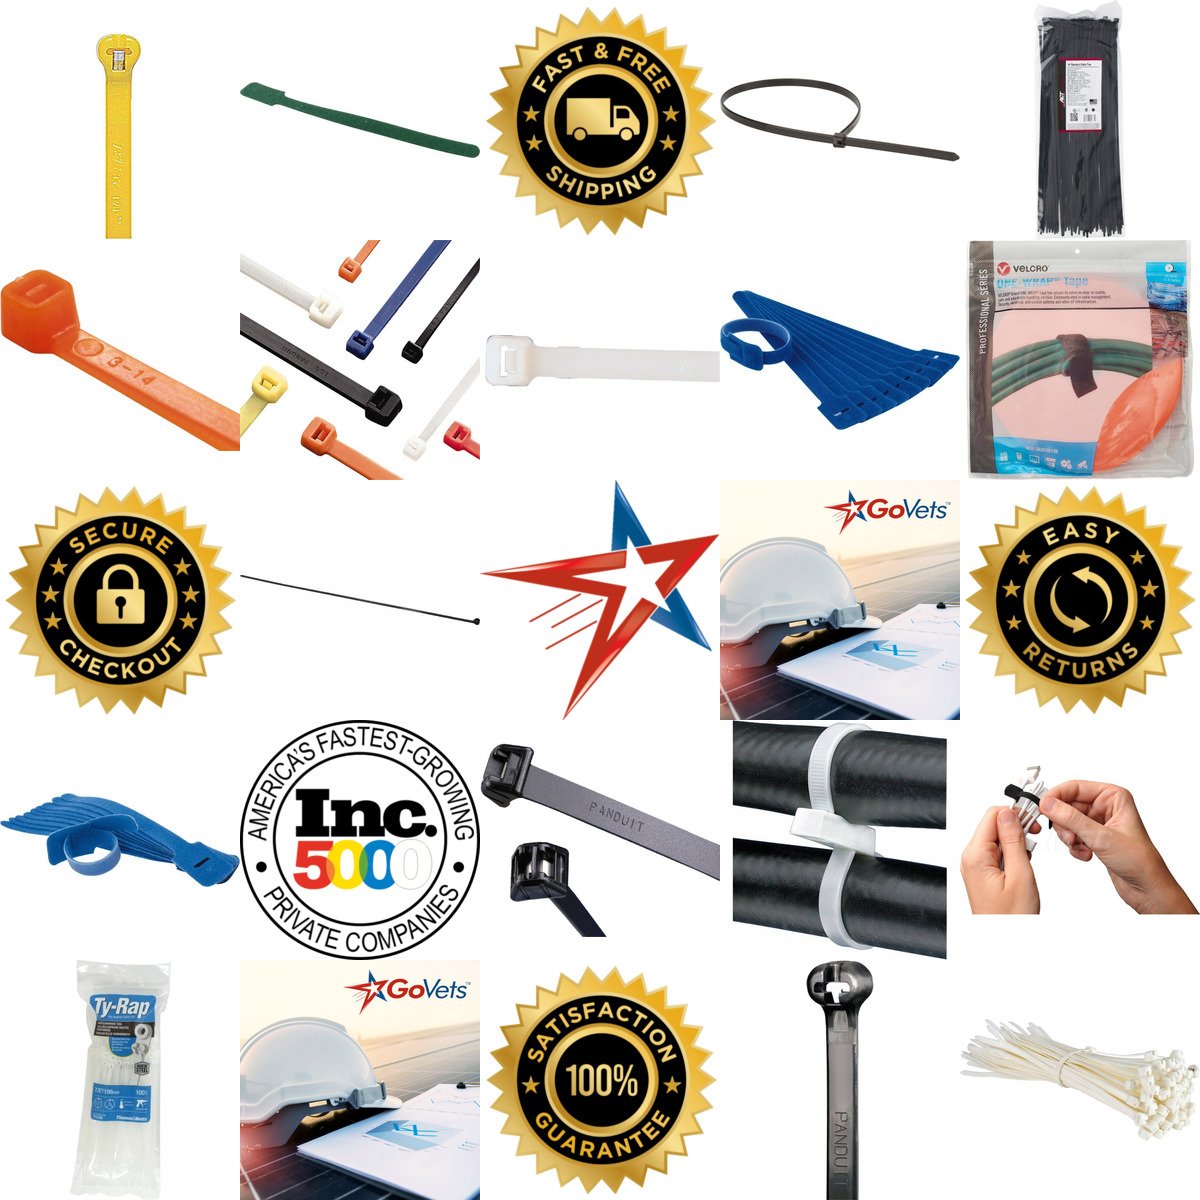 A selection of Cable Ties products on GoVets